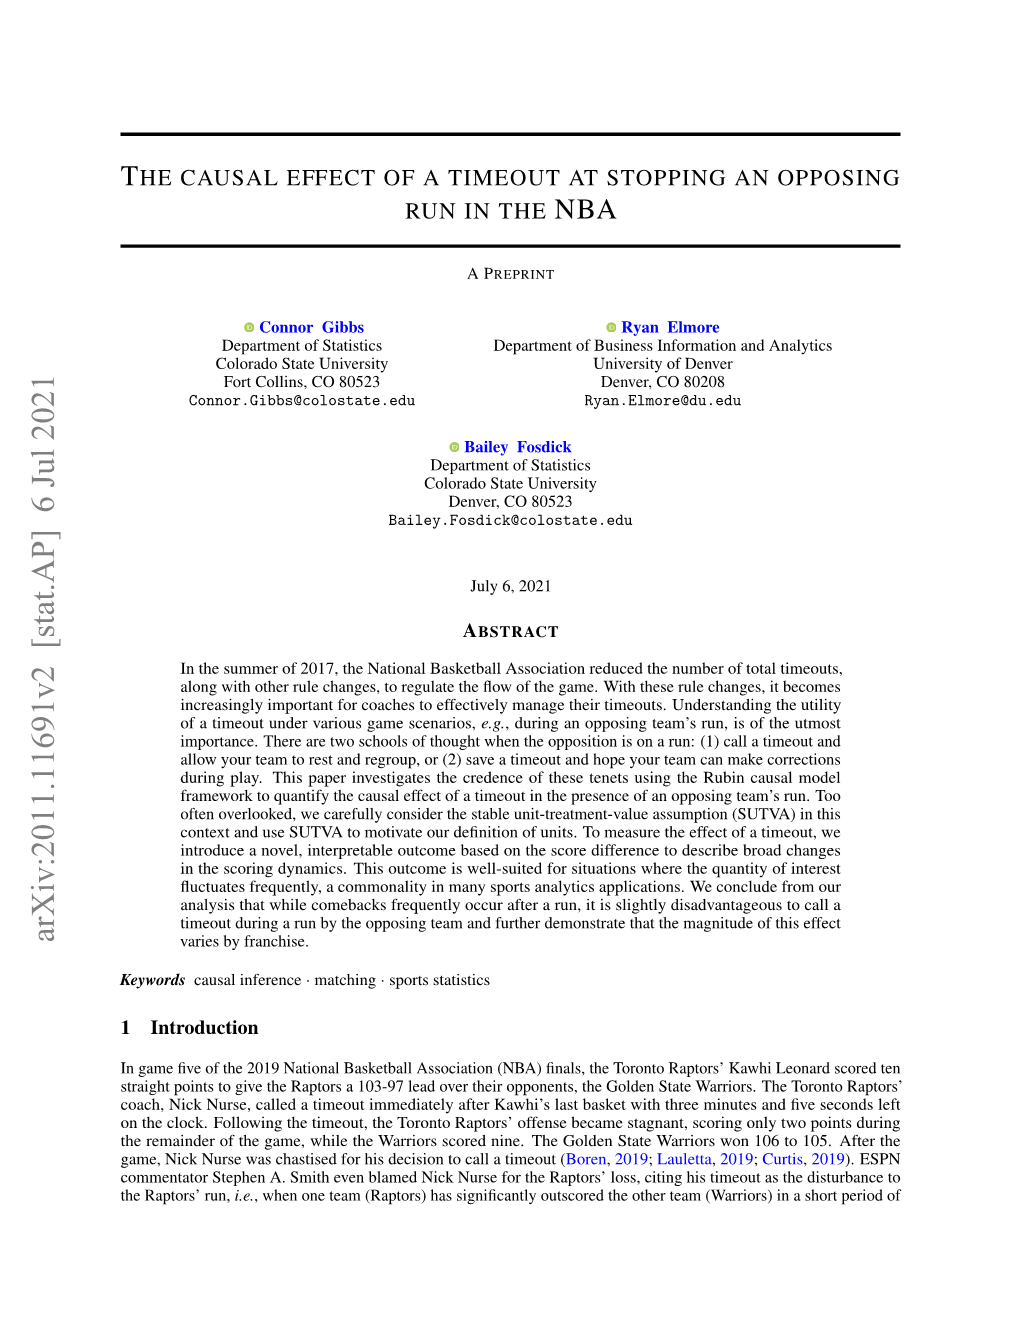 The Causal Effect of a Timeout at Stopping an Opposing Run in The